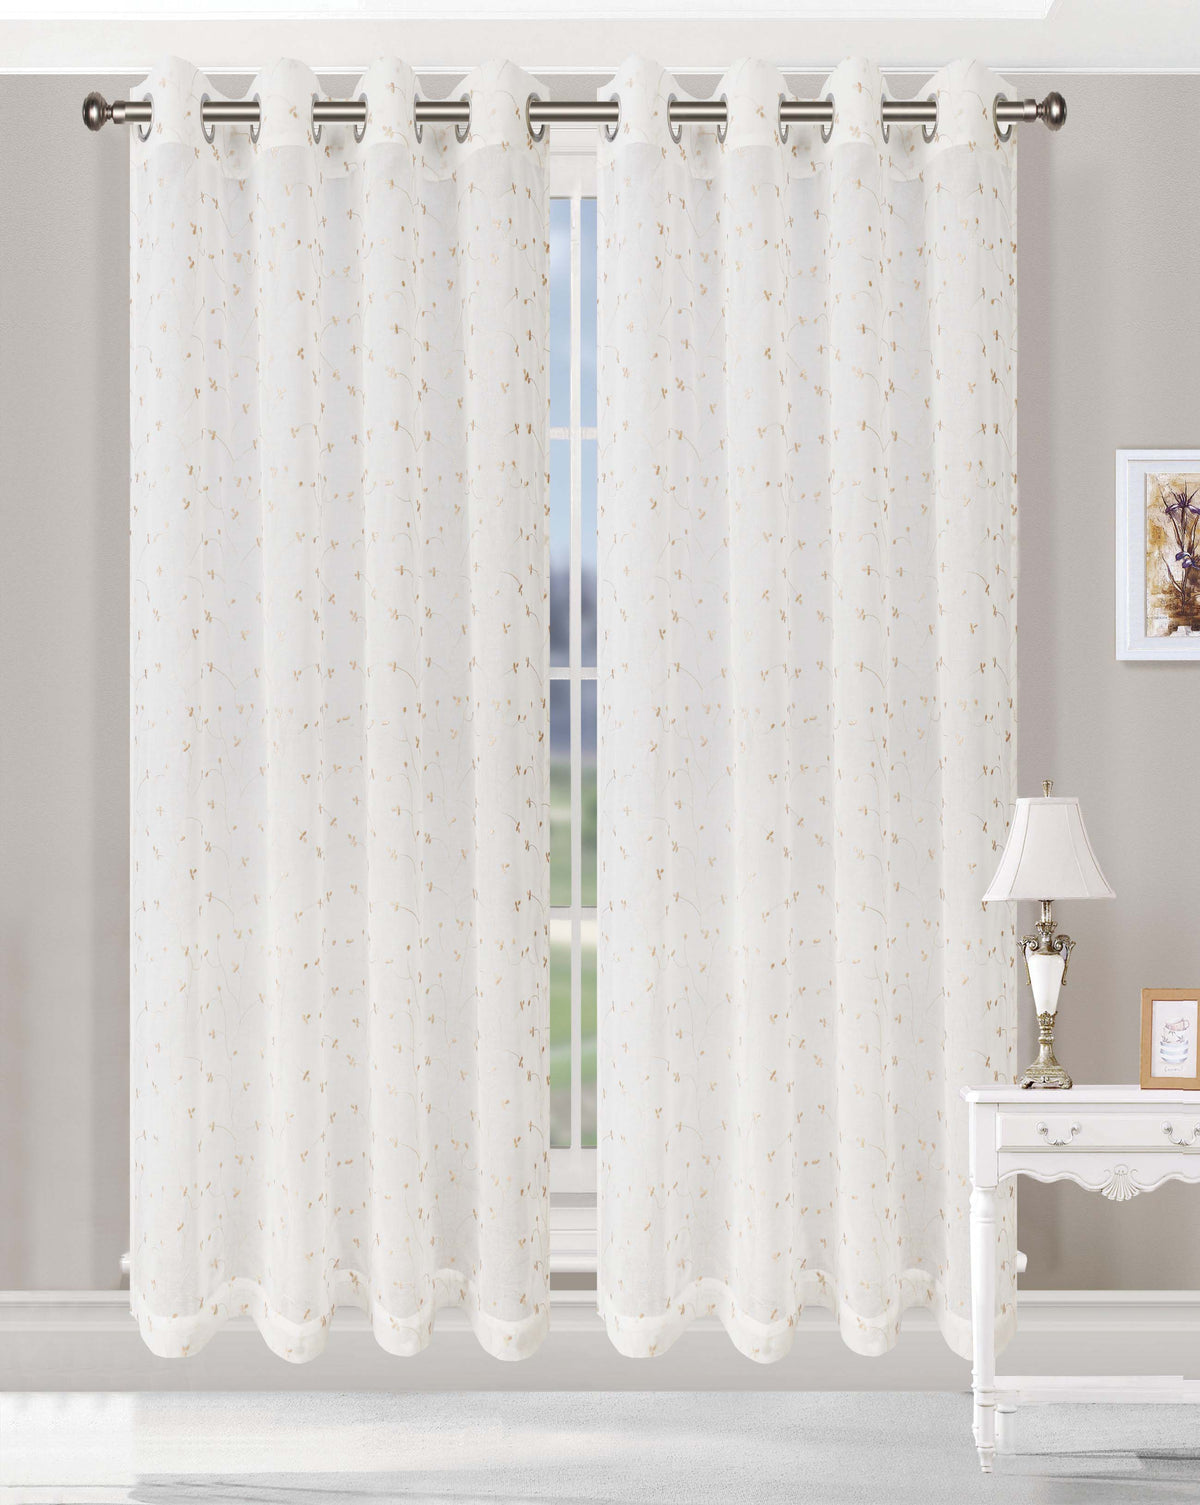 Embroidered Flower 2 Piece Grommet Sheer Curtain Panel Set